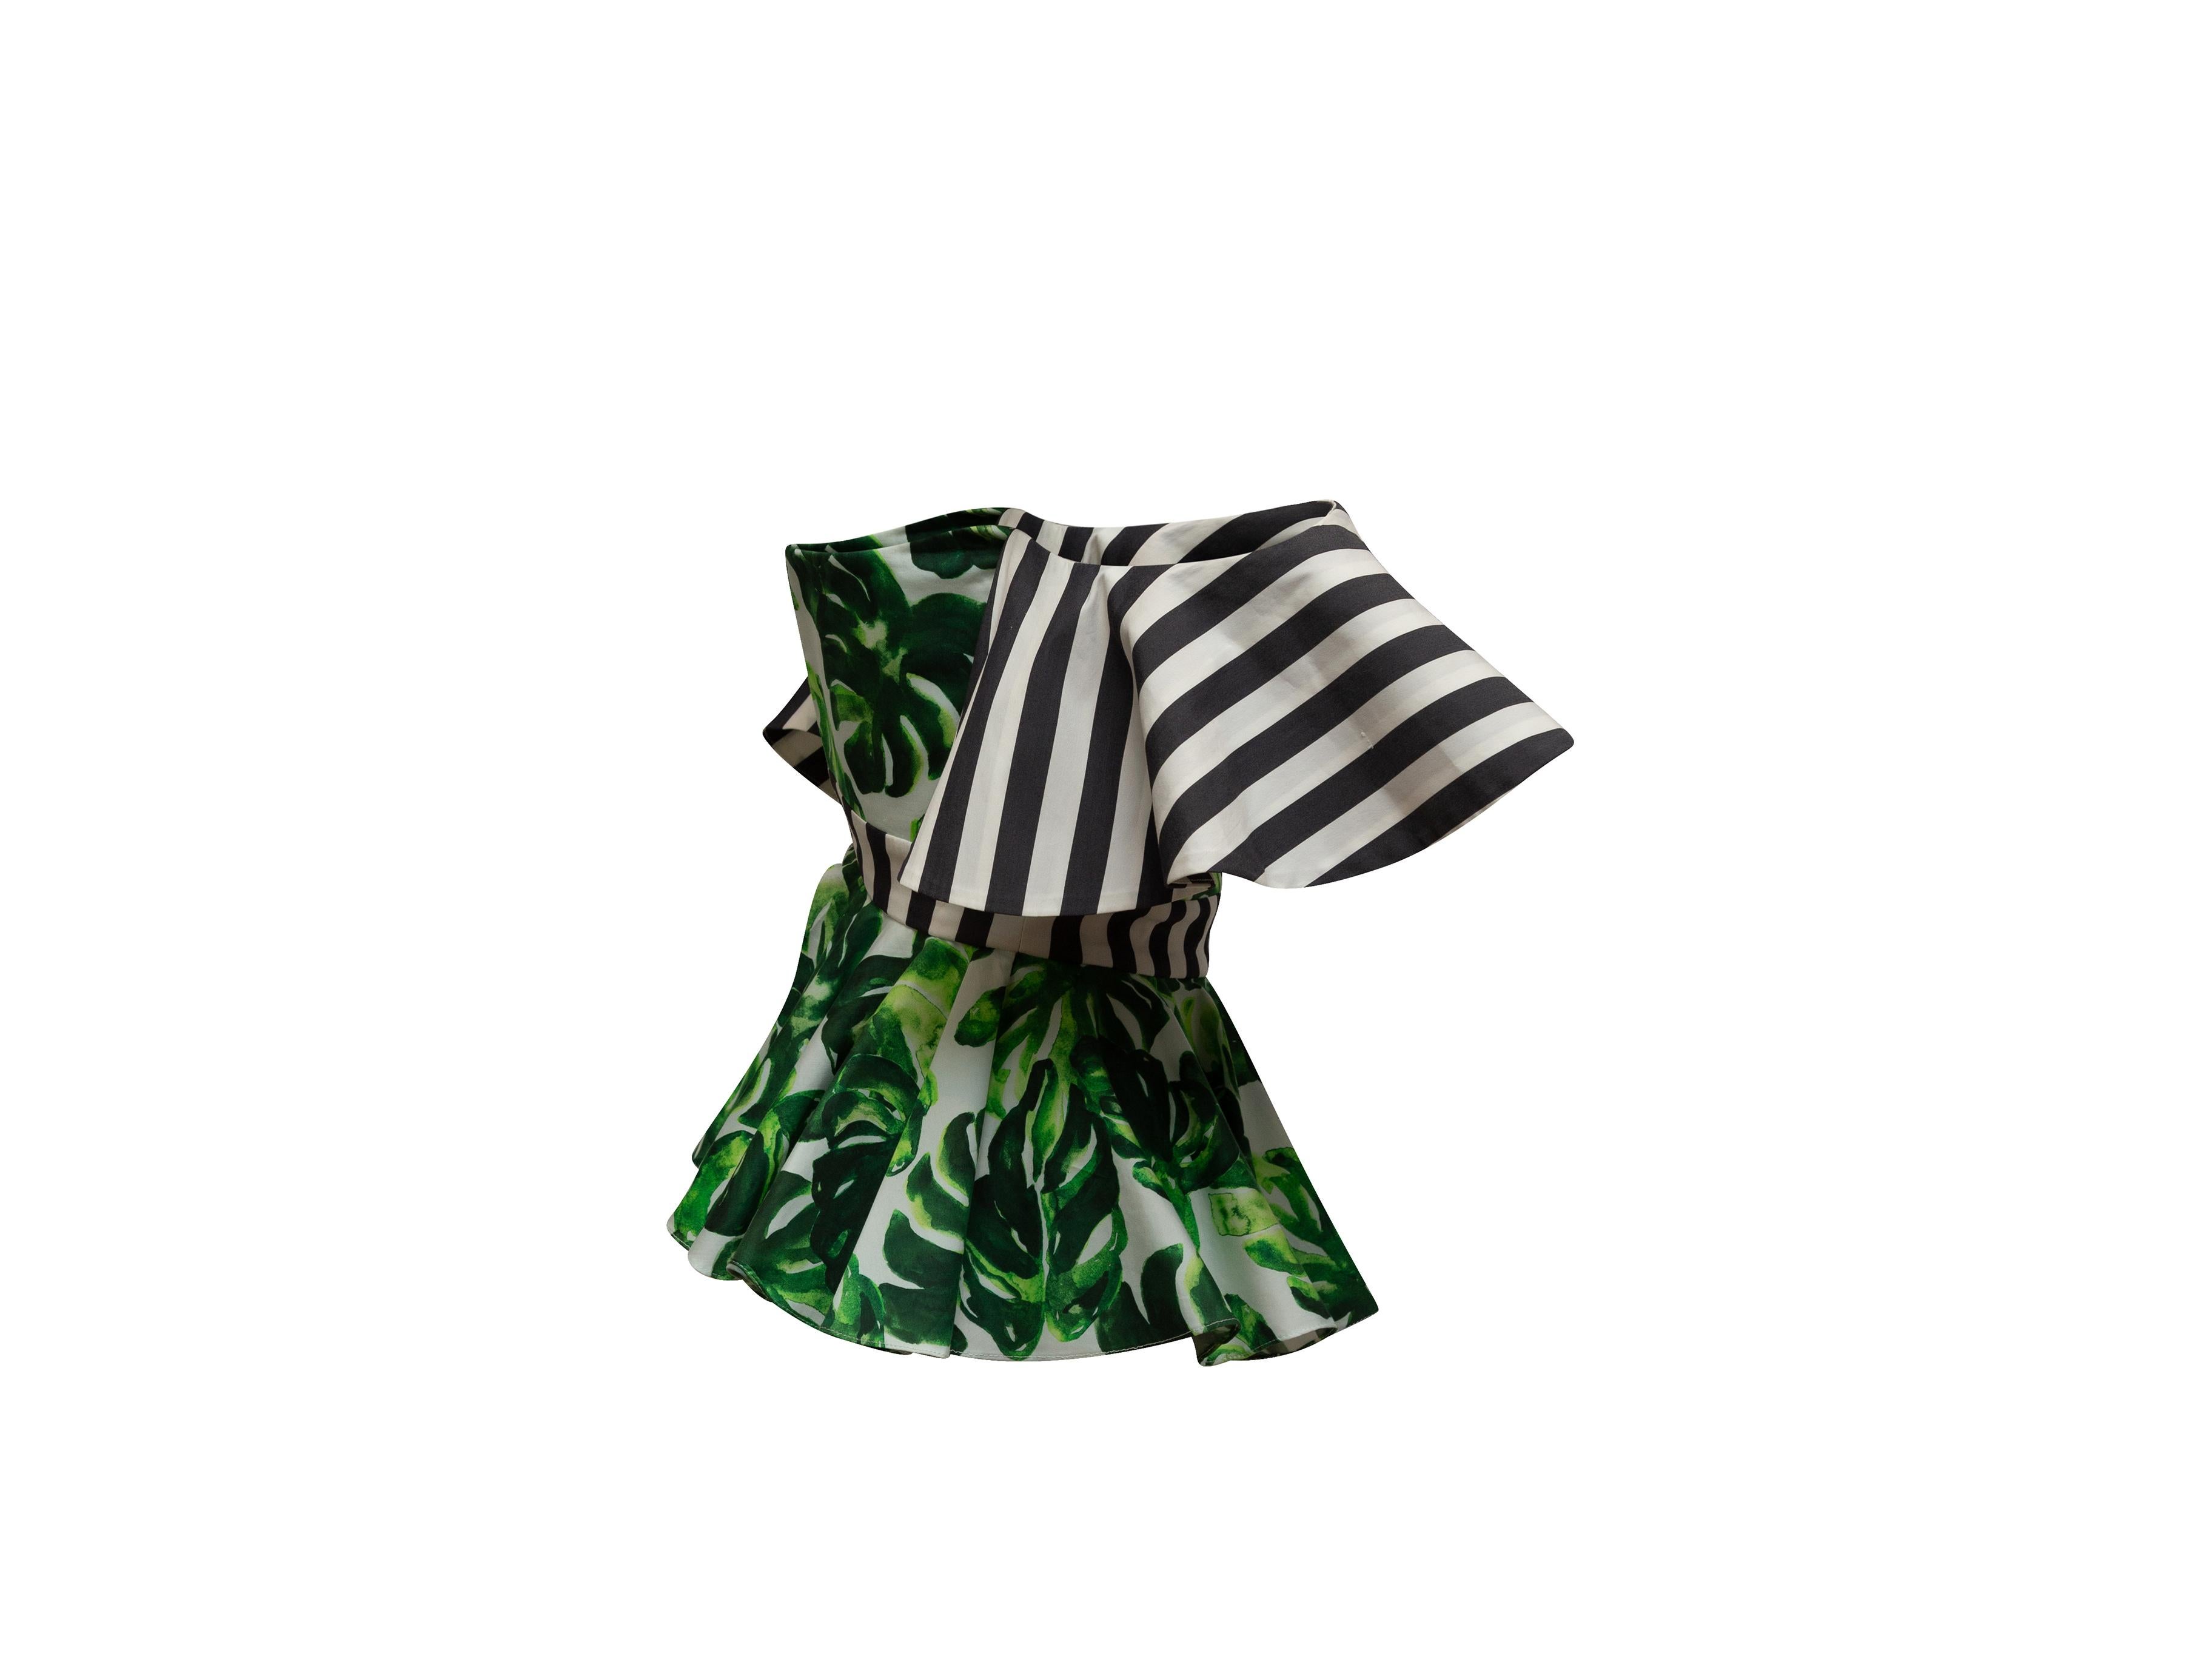 Product details: Green and multicolor off-the-shoulder top by Caroline Constas. Monstera leaf print throughout. Black and white striped trim. Sweetheart neckline. Zip closure at back. 28